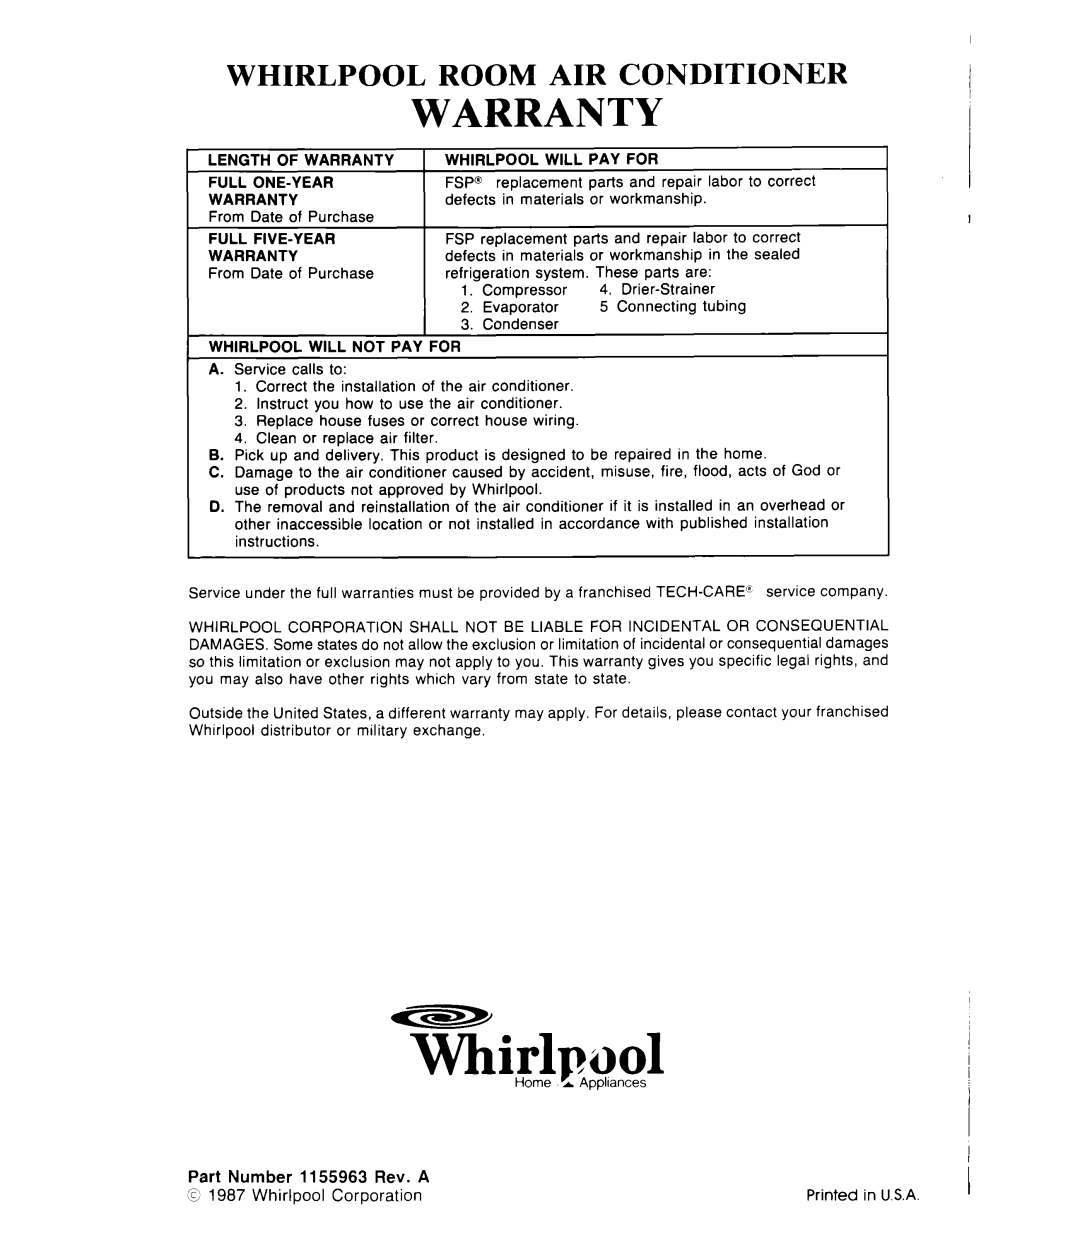 Whirlpool AC1 352 manual Warranty, Whirlpool Room Air Condi’I’Ioner, Whirlnool, Part Number 1155963 Rev. A 